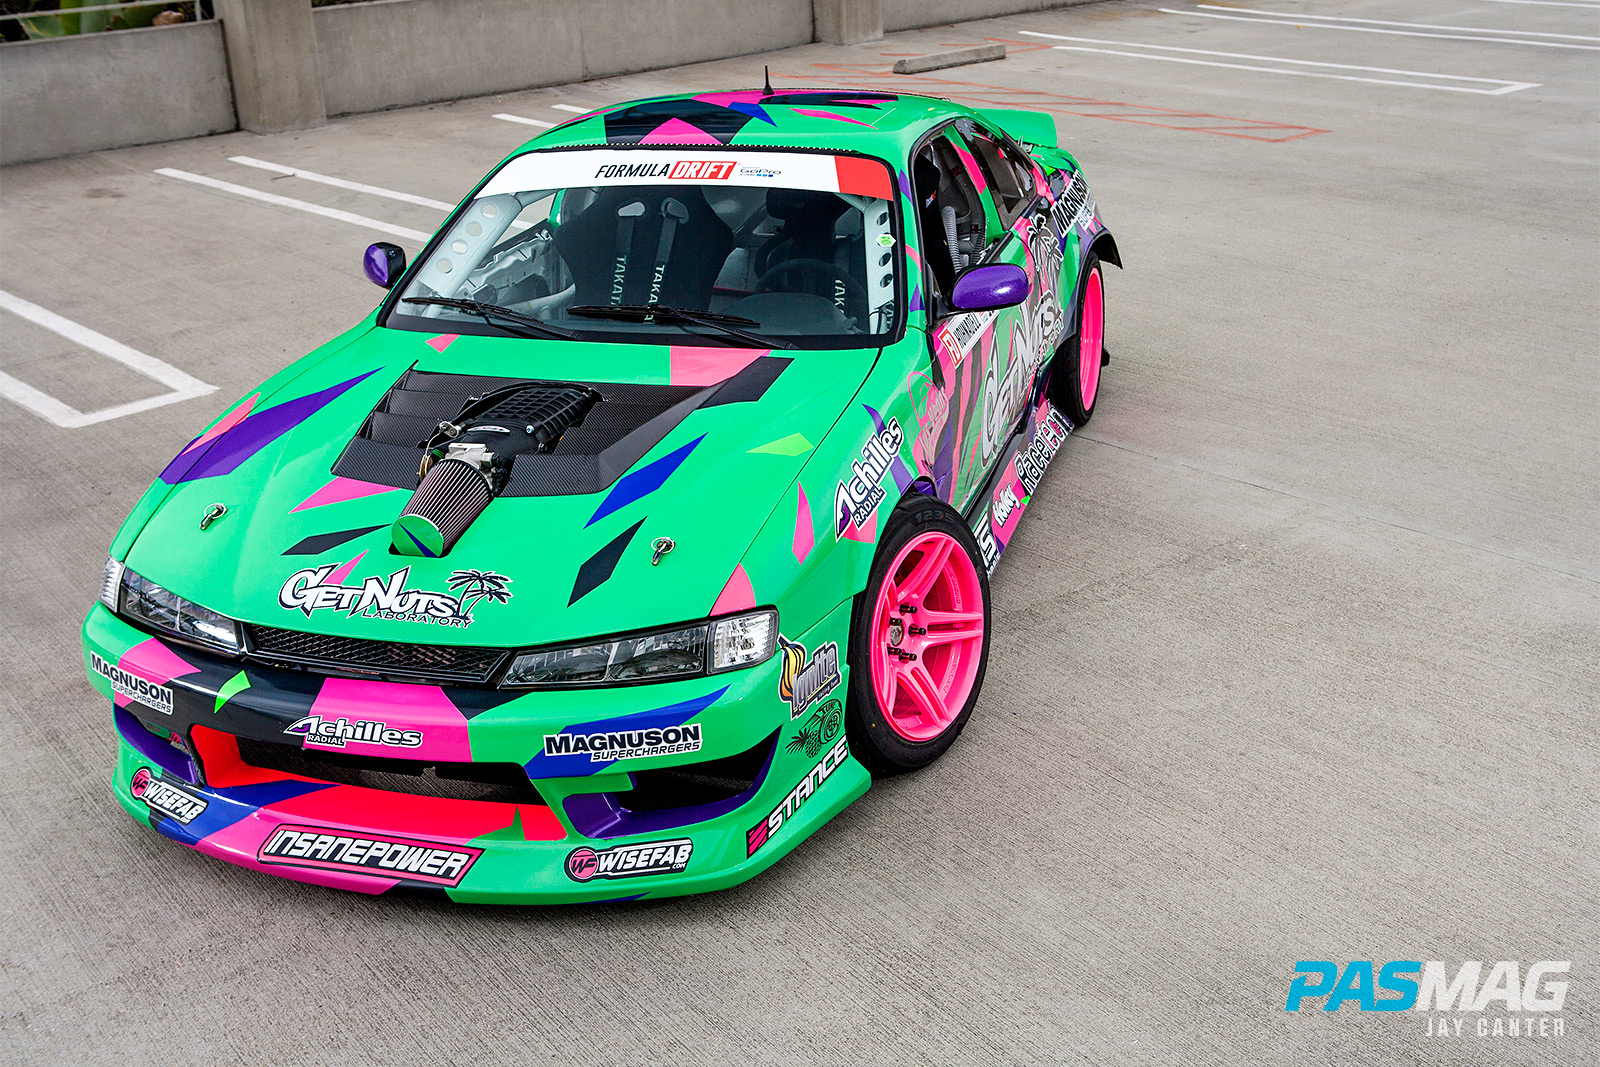 Alec Hohnadell 1995 Nissan 240sx S14 PASMAG canter 6